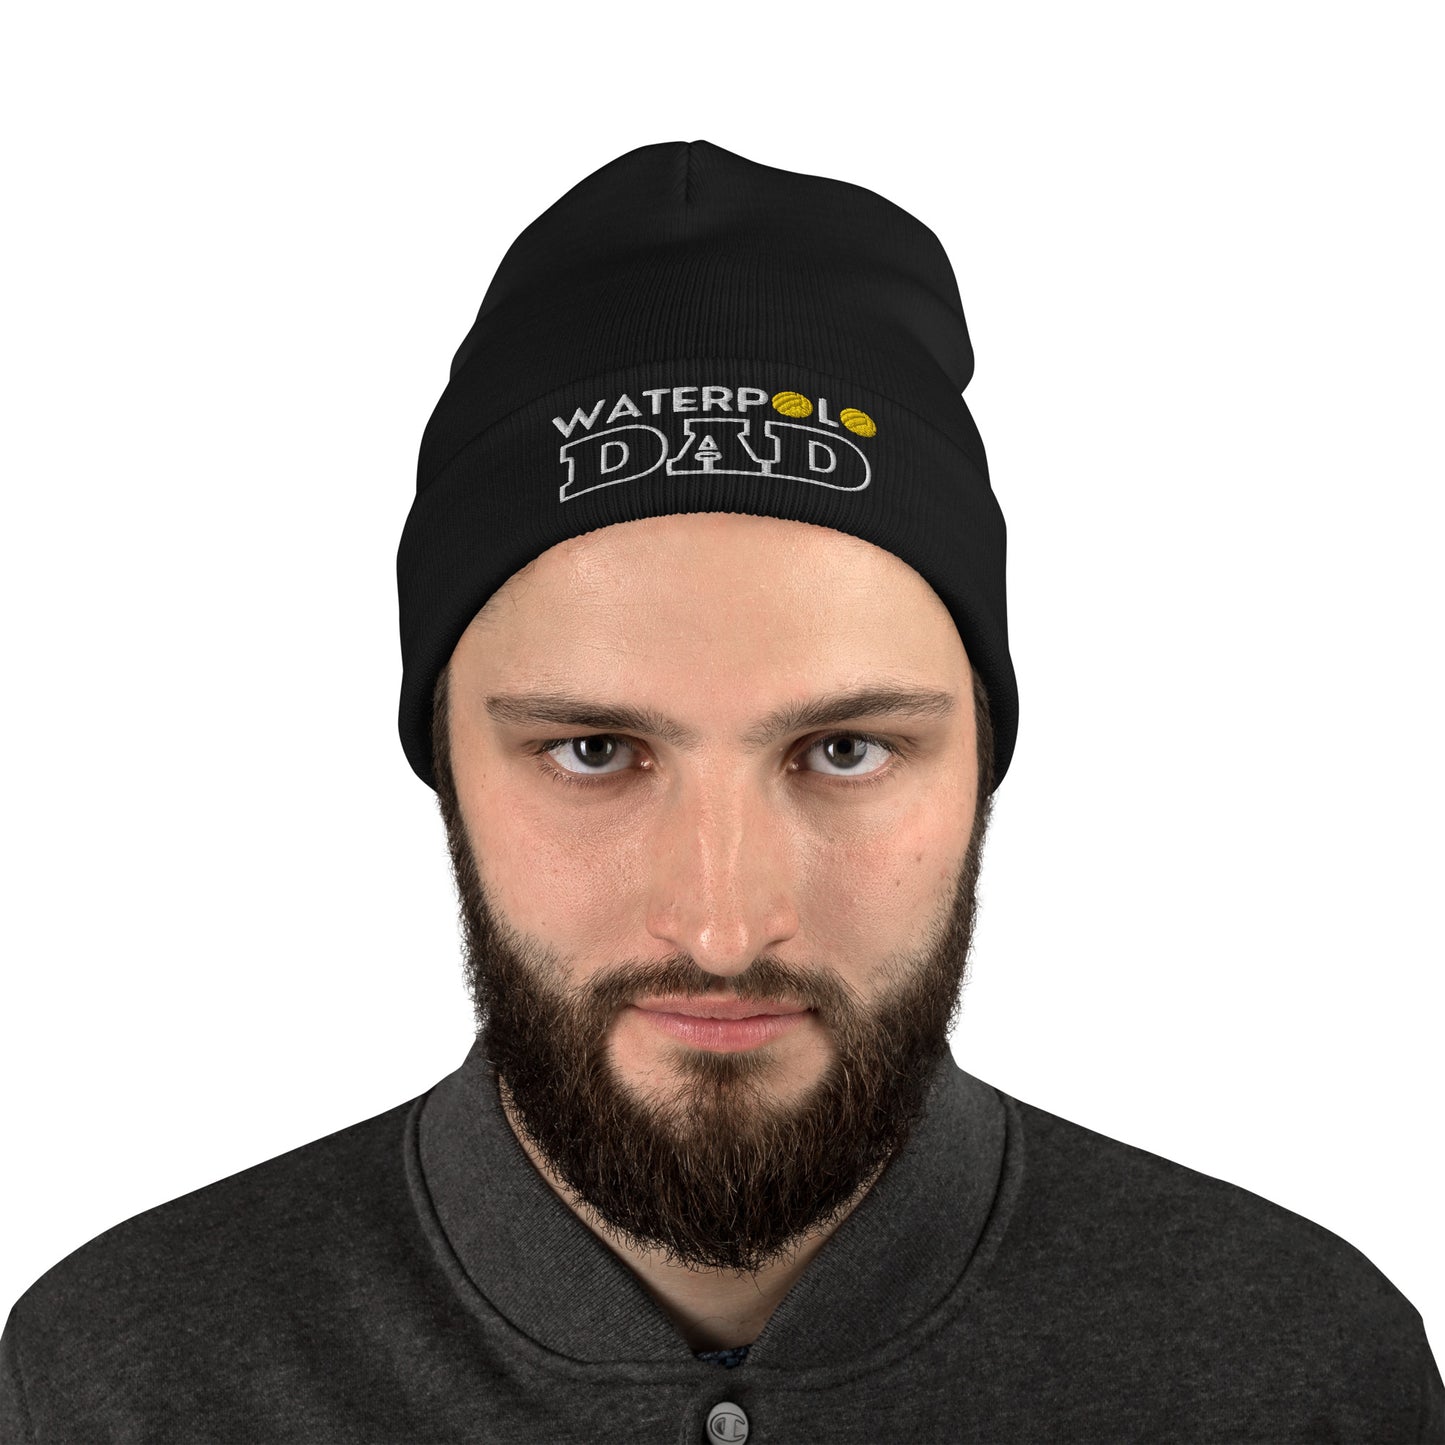 Waterpolo Dad - Embroidered Knit Beanie | Otto Cap 82-480